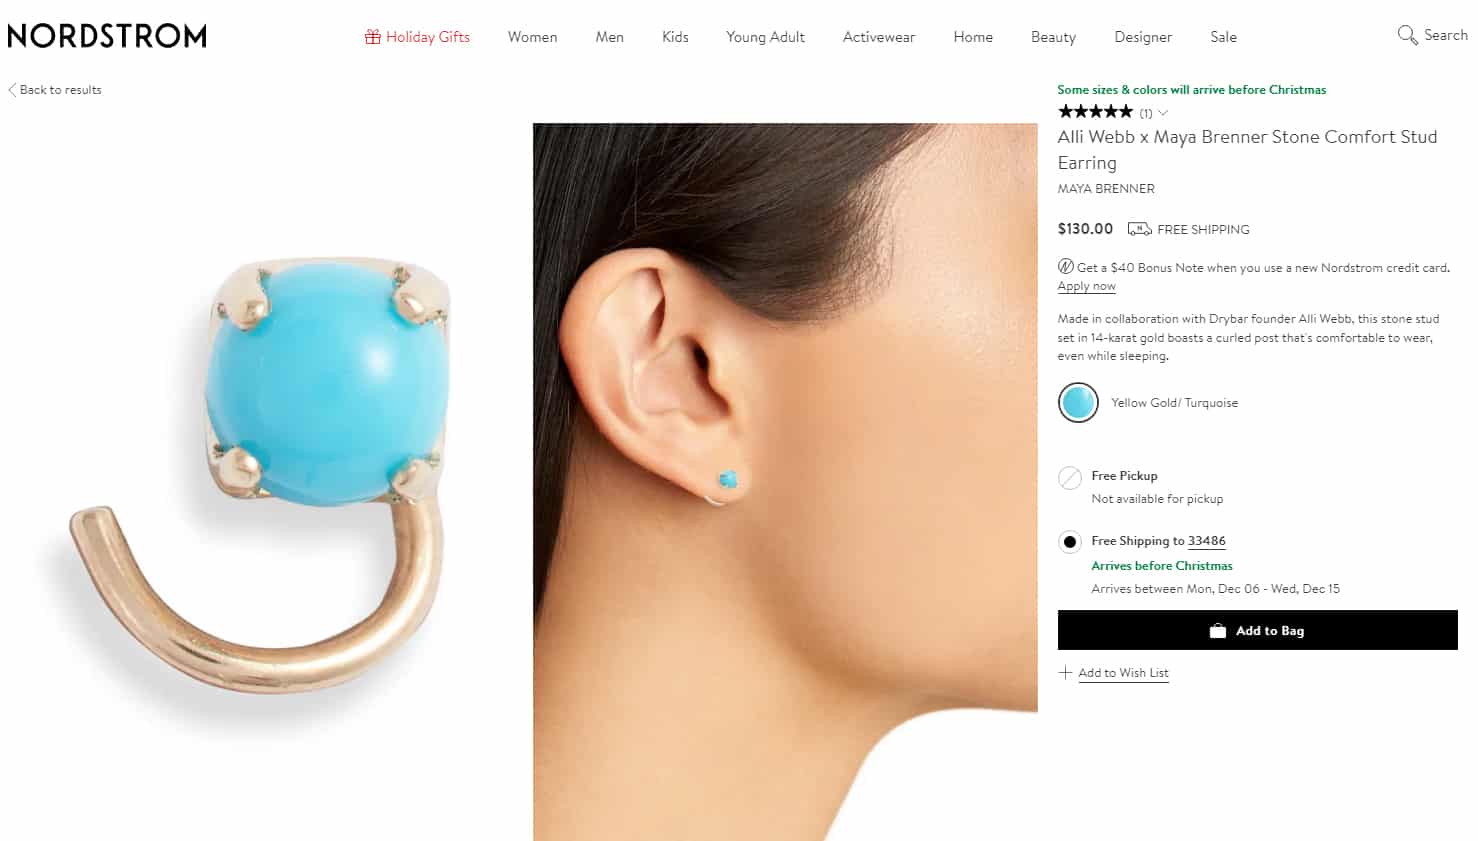 Example image of Nordstrom product page.